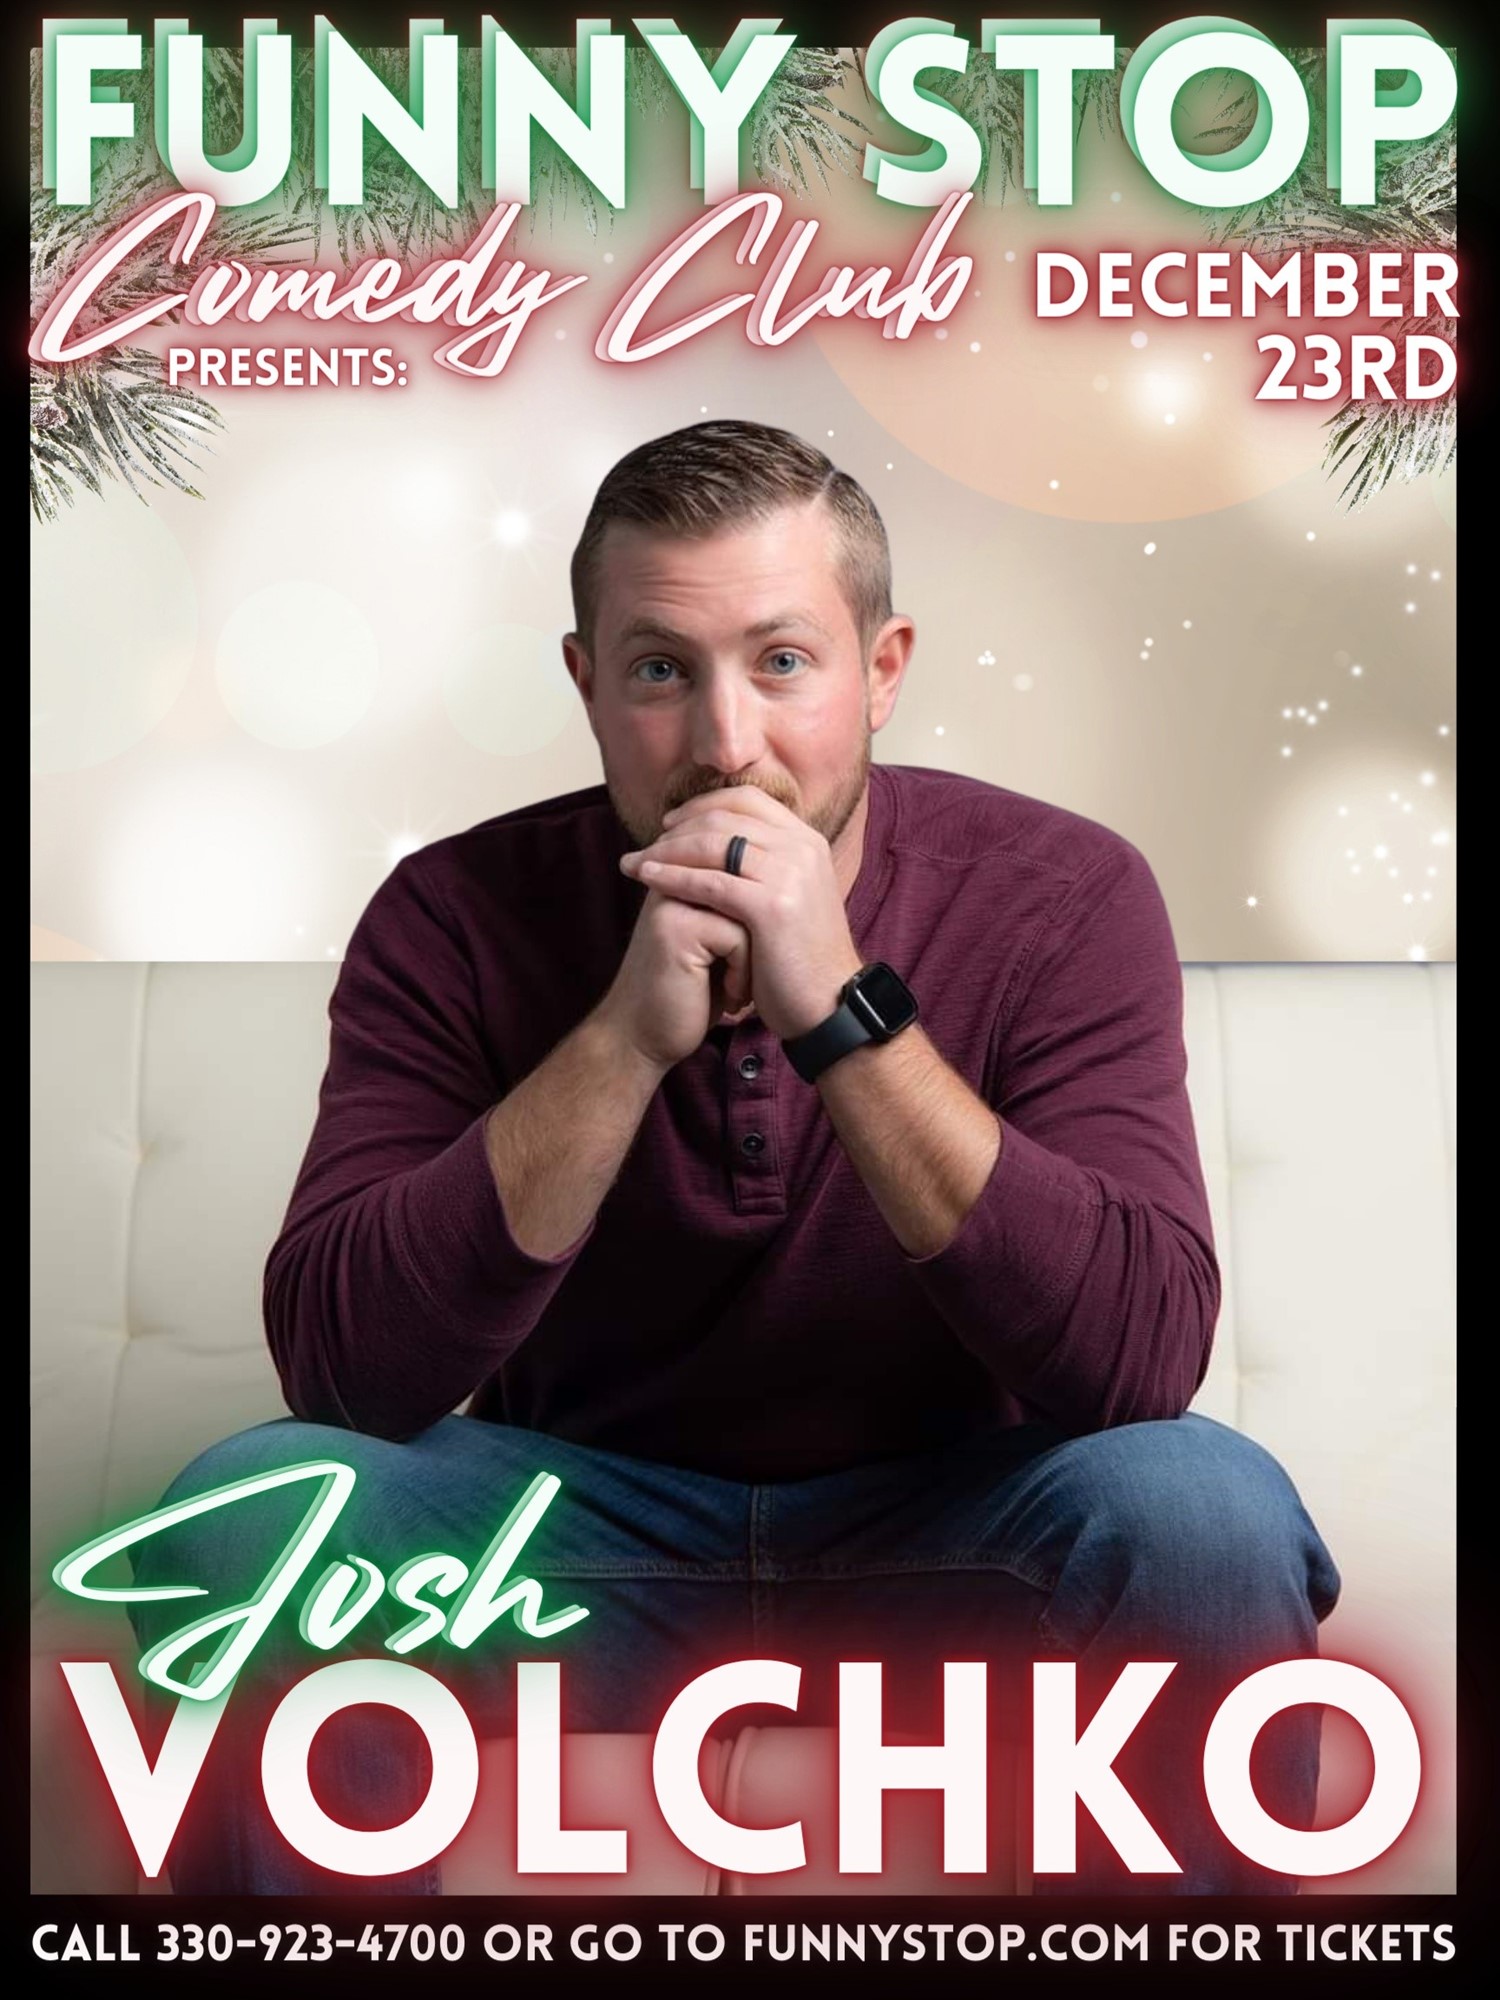 Josh Volchko 7:20pm Show Funny Stop Comedy Club on dic. 23, 19:20@Funny Stop Comedy Club - Buy tickets and Get information on Funny Stop funnystop.online